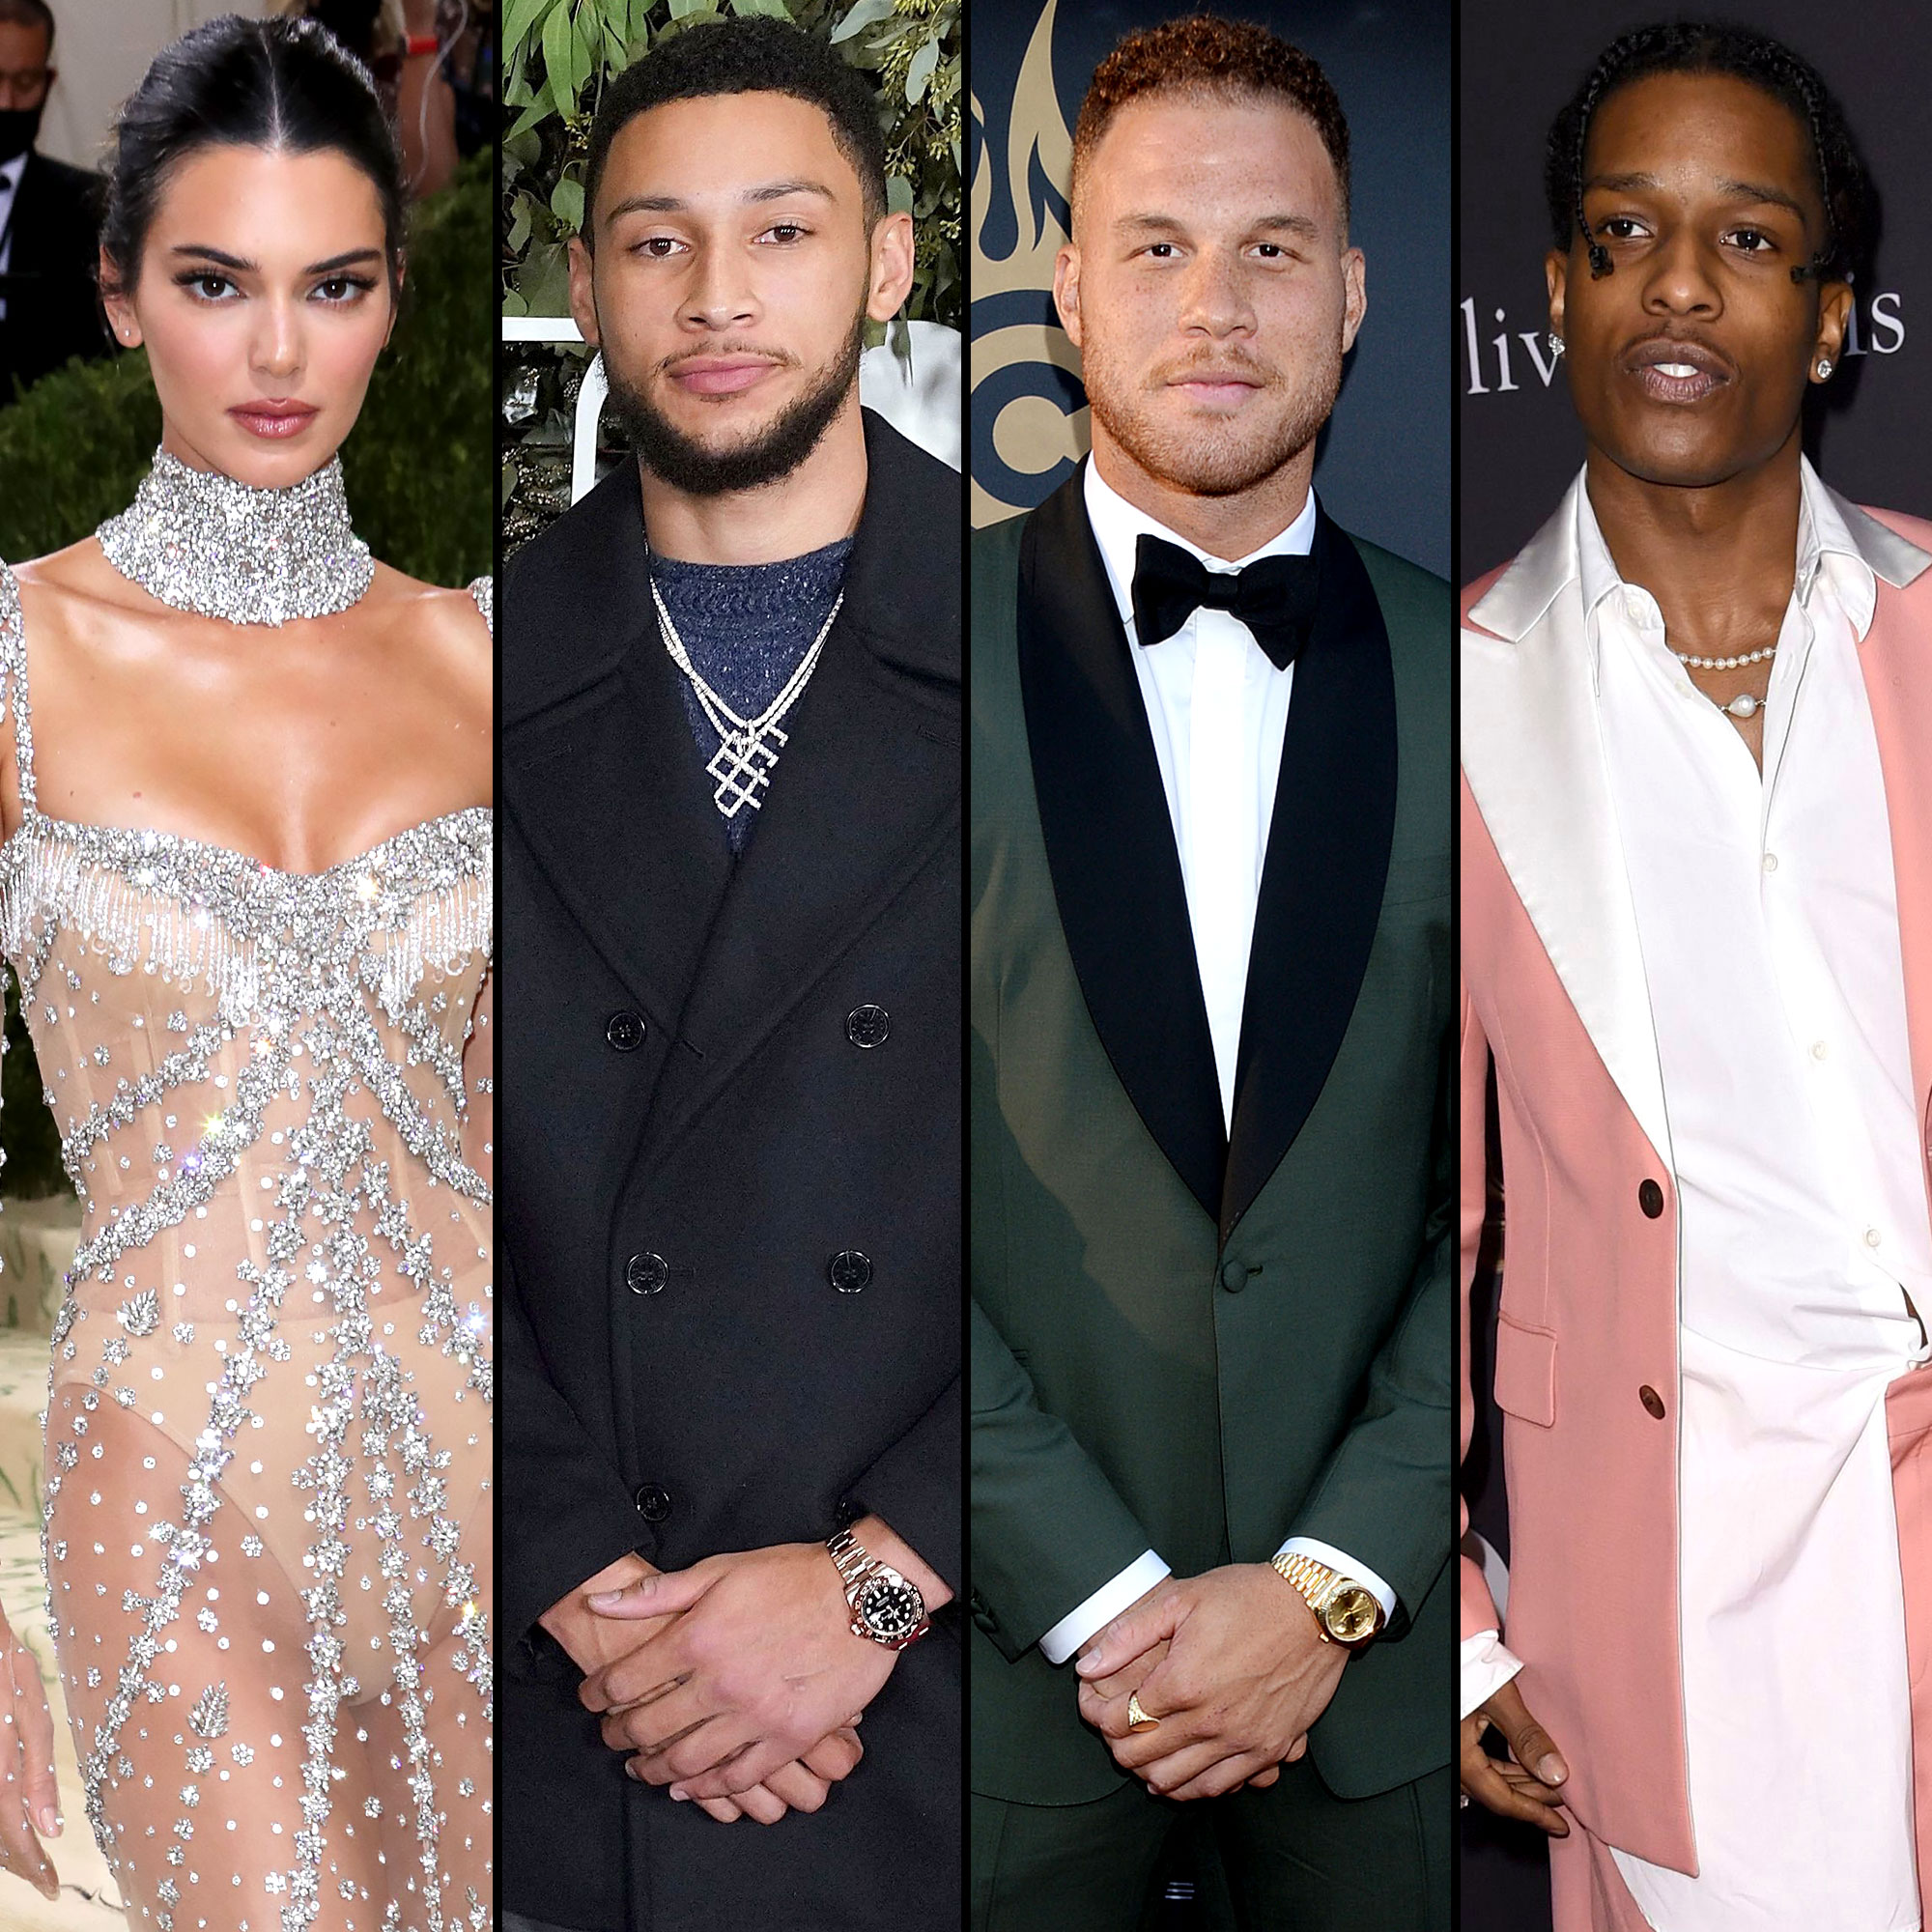 Who Are Kendall Jenner's Ex-Boyfriends Dating Now? Their Girlfriends